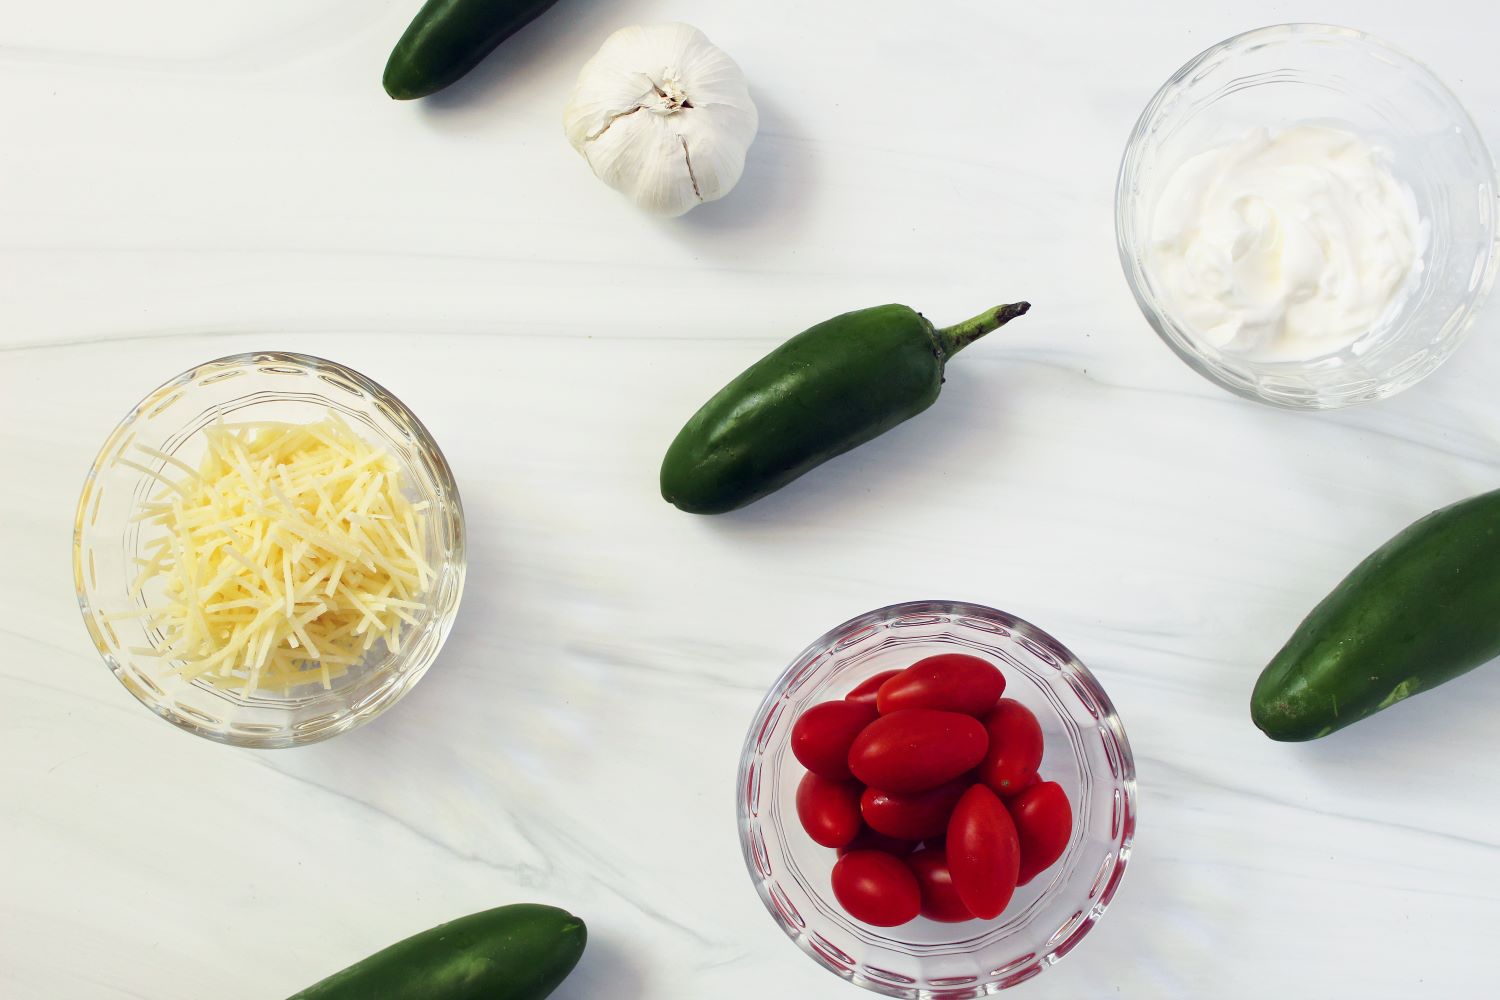 goat cheese parmesan stuffed jalapeno peppers ingredients flatlay 1